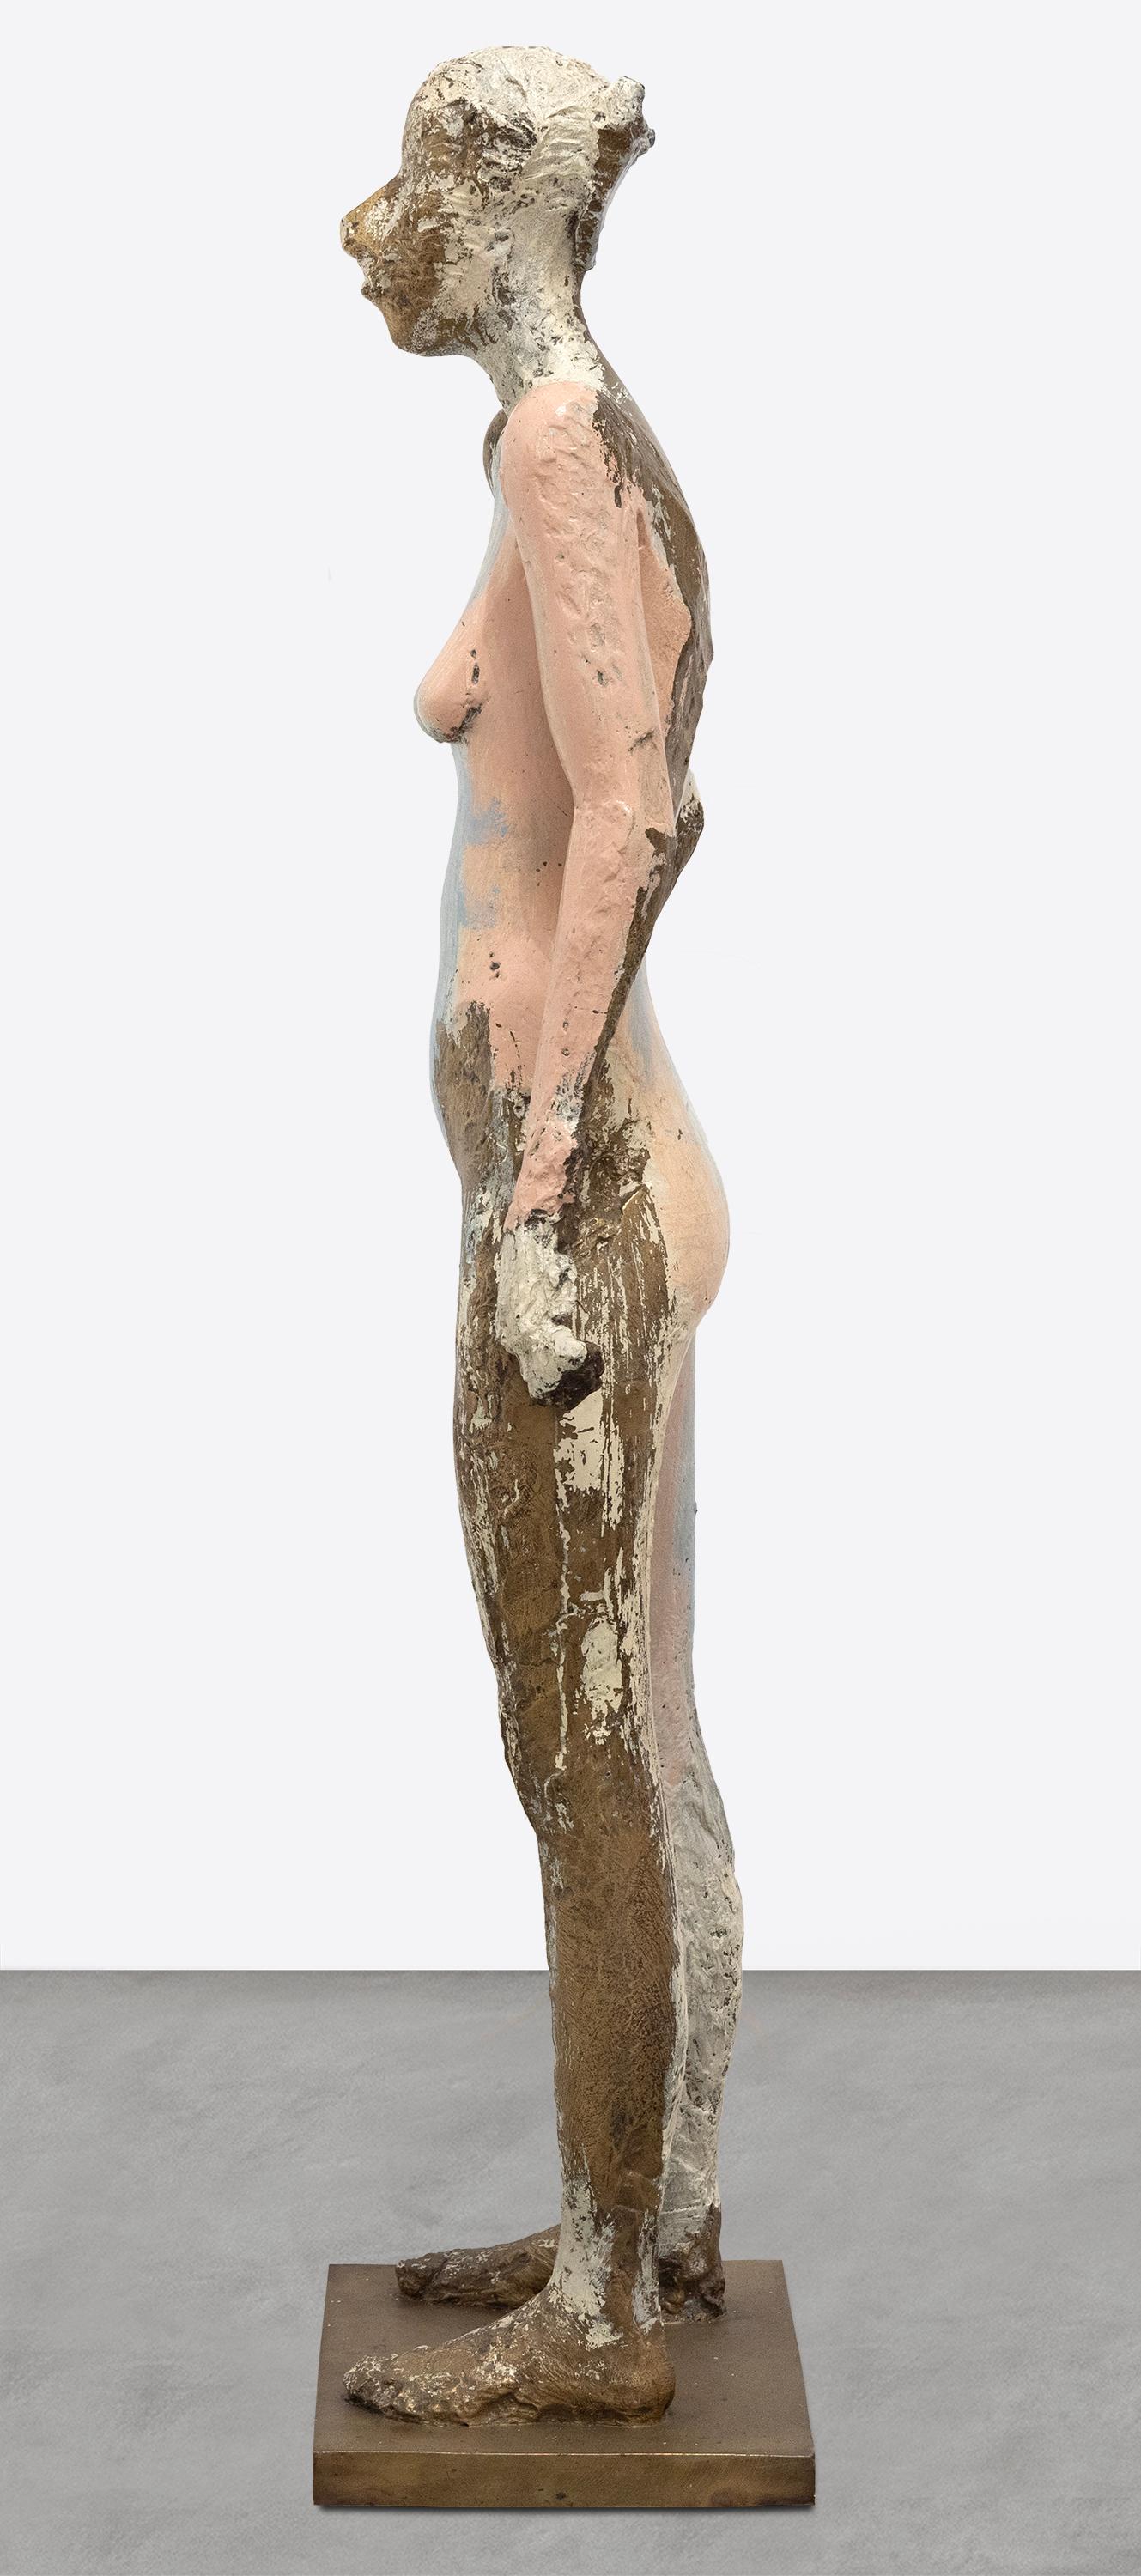 Untitled Standing Figure No. 3 - Contemporary Sculpture by Manuel Neri